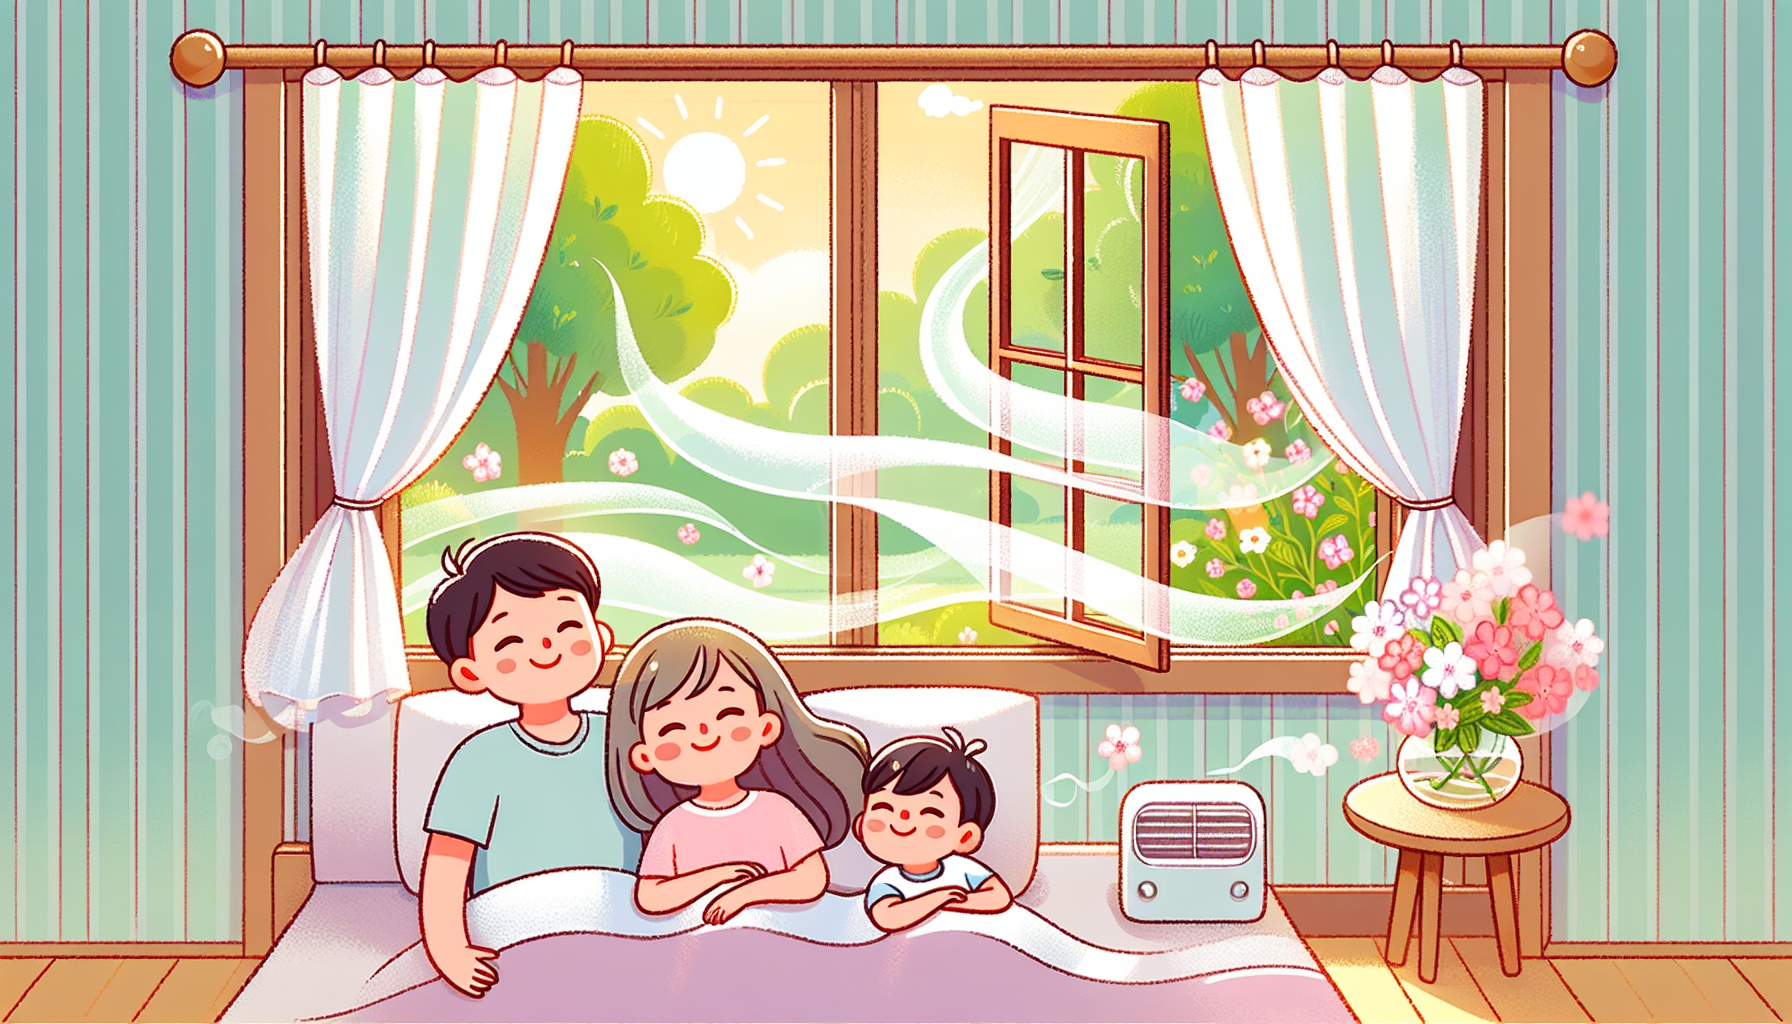 Illustration of a family enjoying fresh air in their well-ventilated home